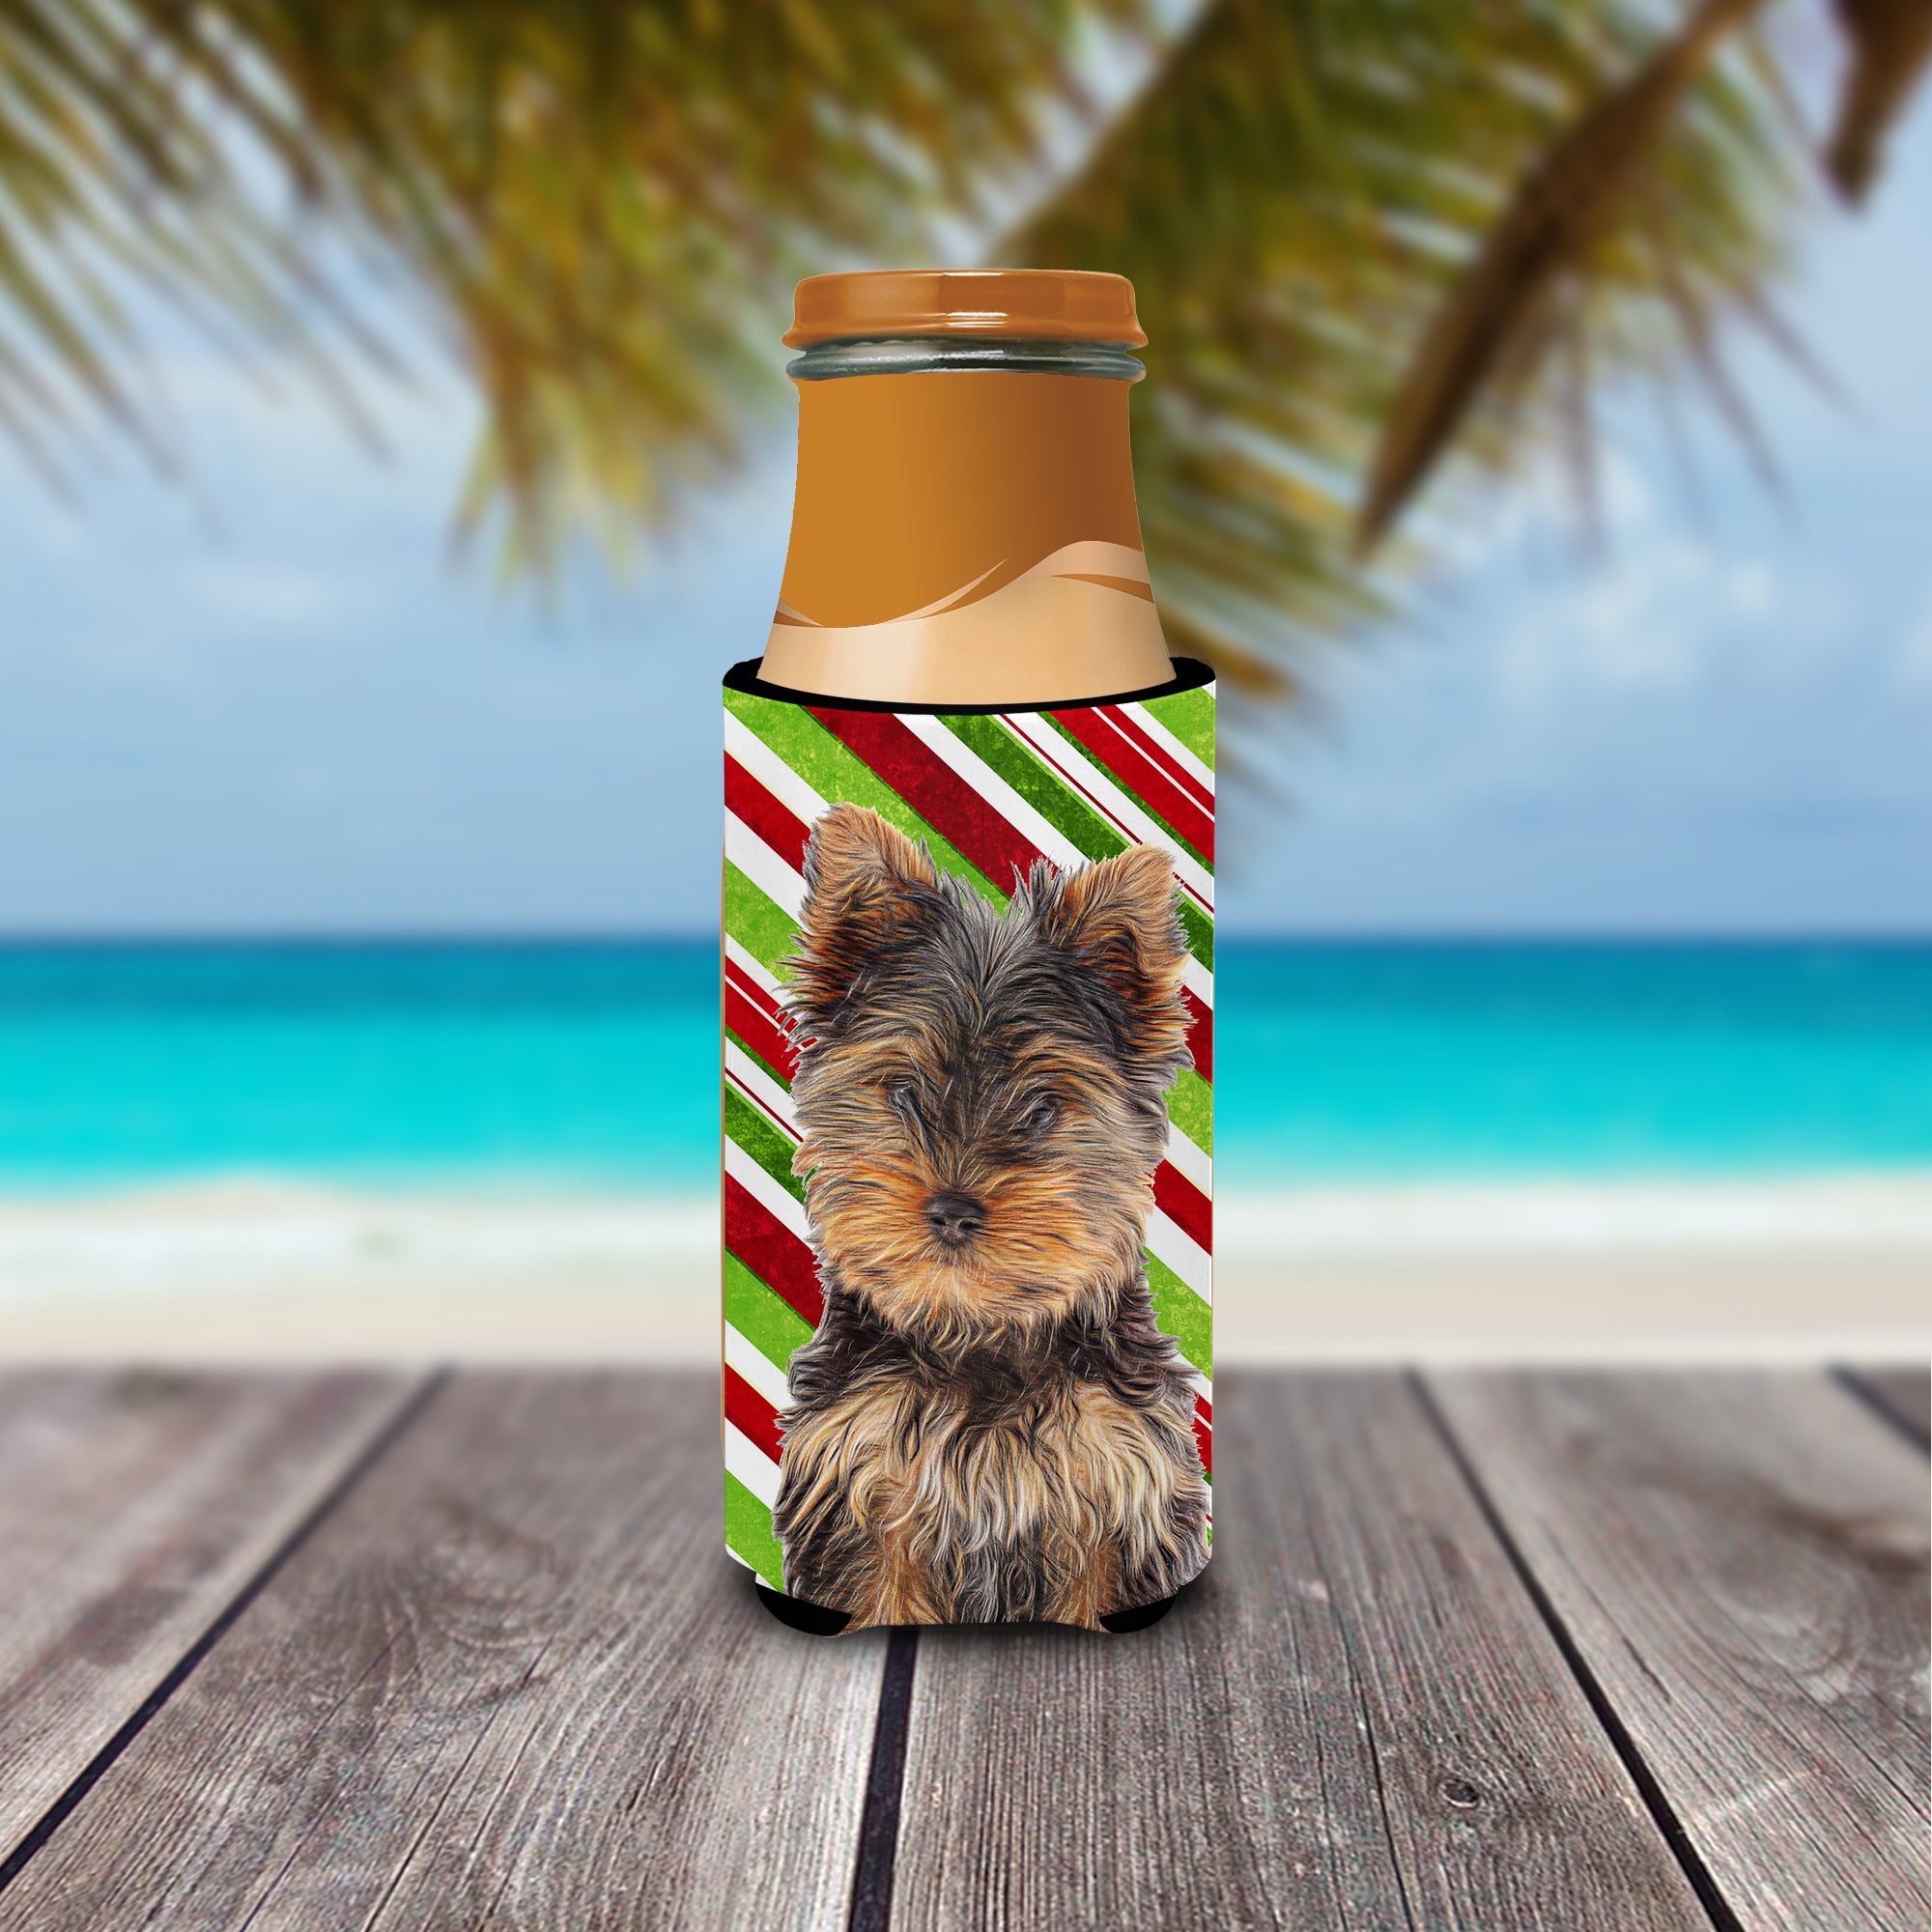 Candy Cane Holiday Christmas Yorkie Puppy / Yorkshire Terrier Ultra Beverage Insulators for slim cans KJ1174MUK.